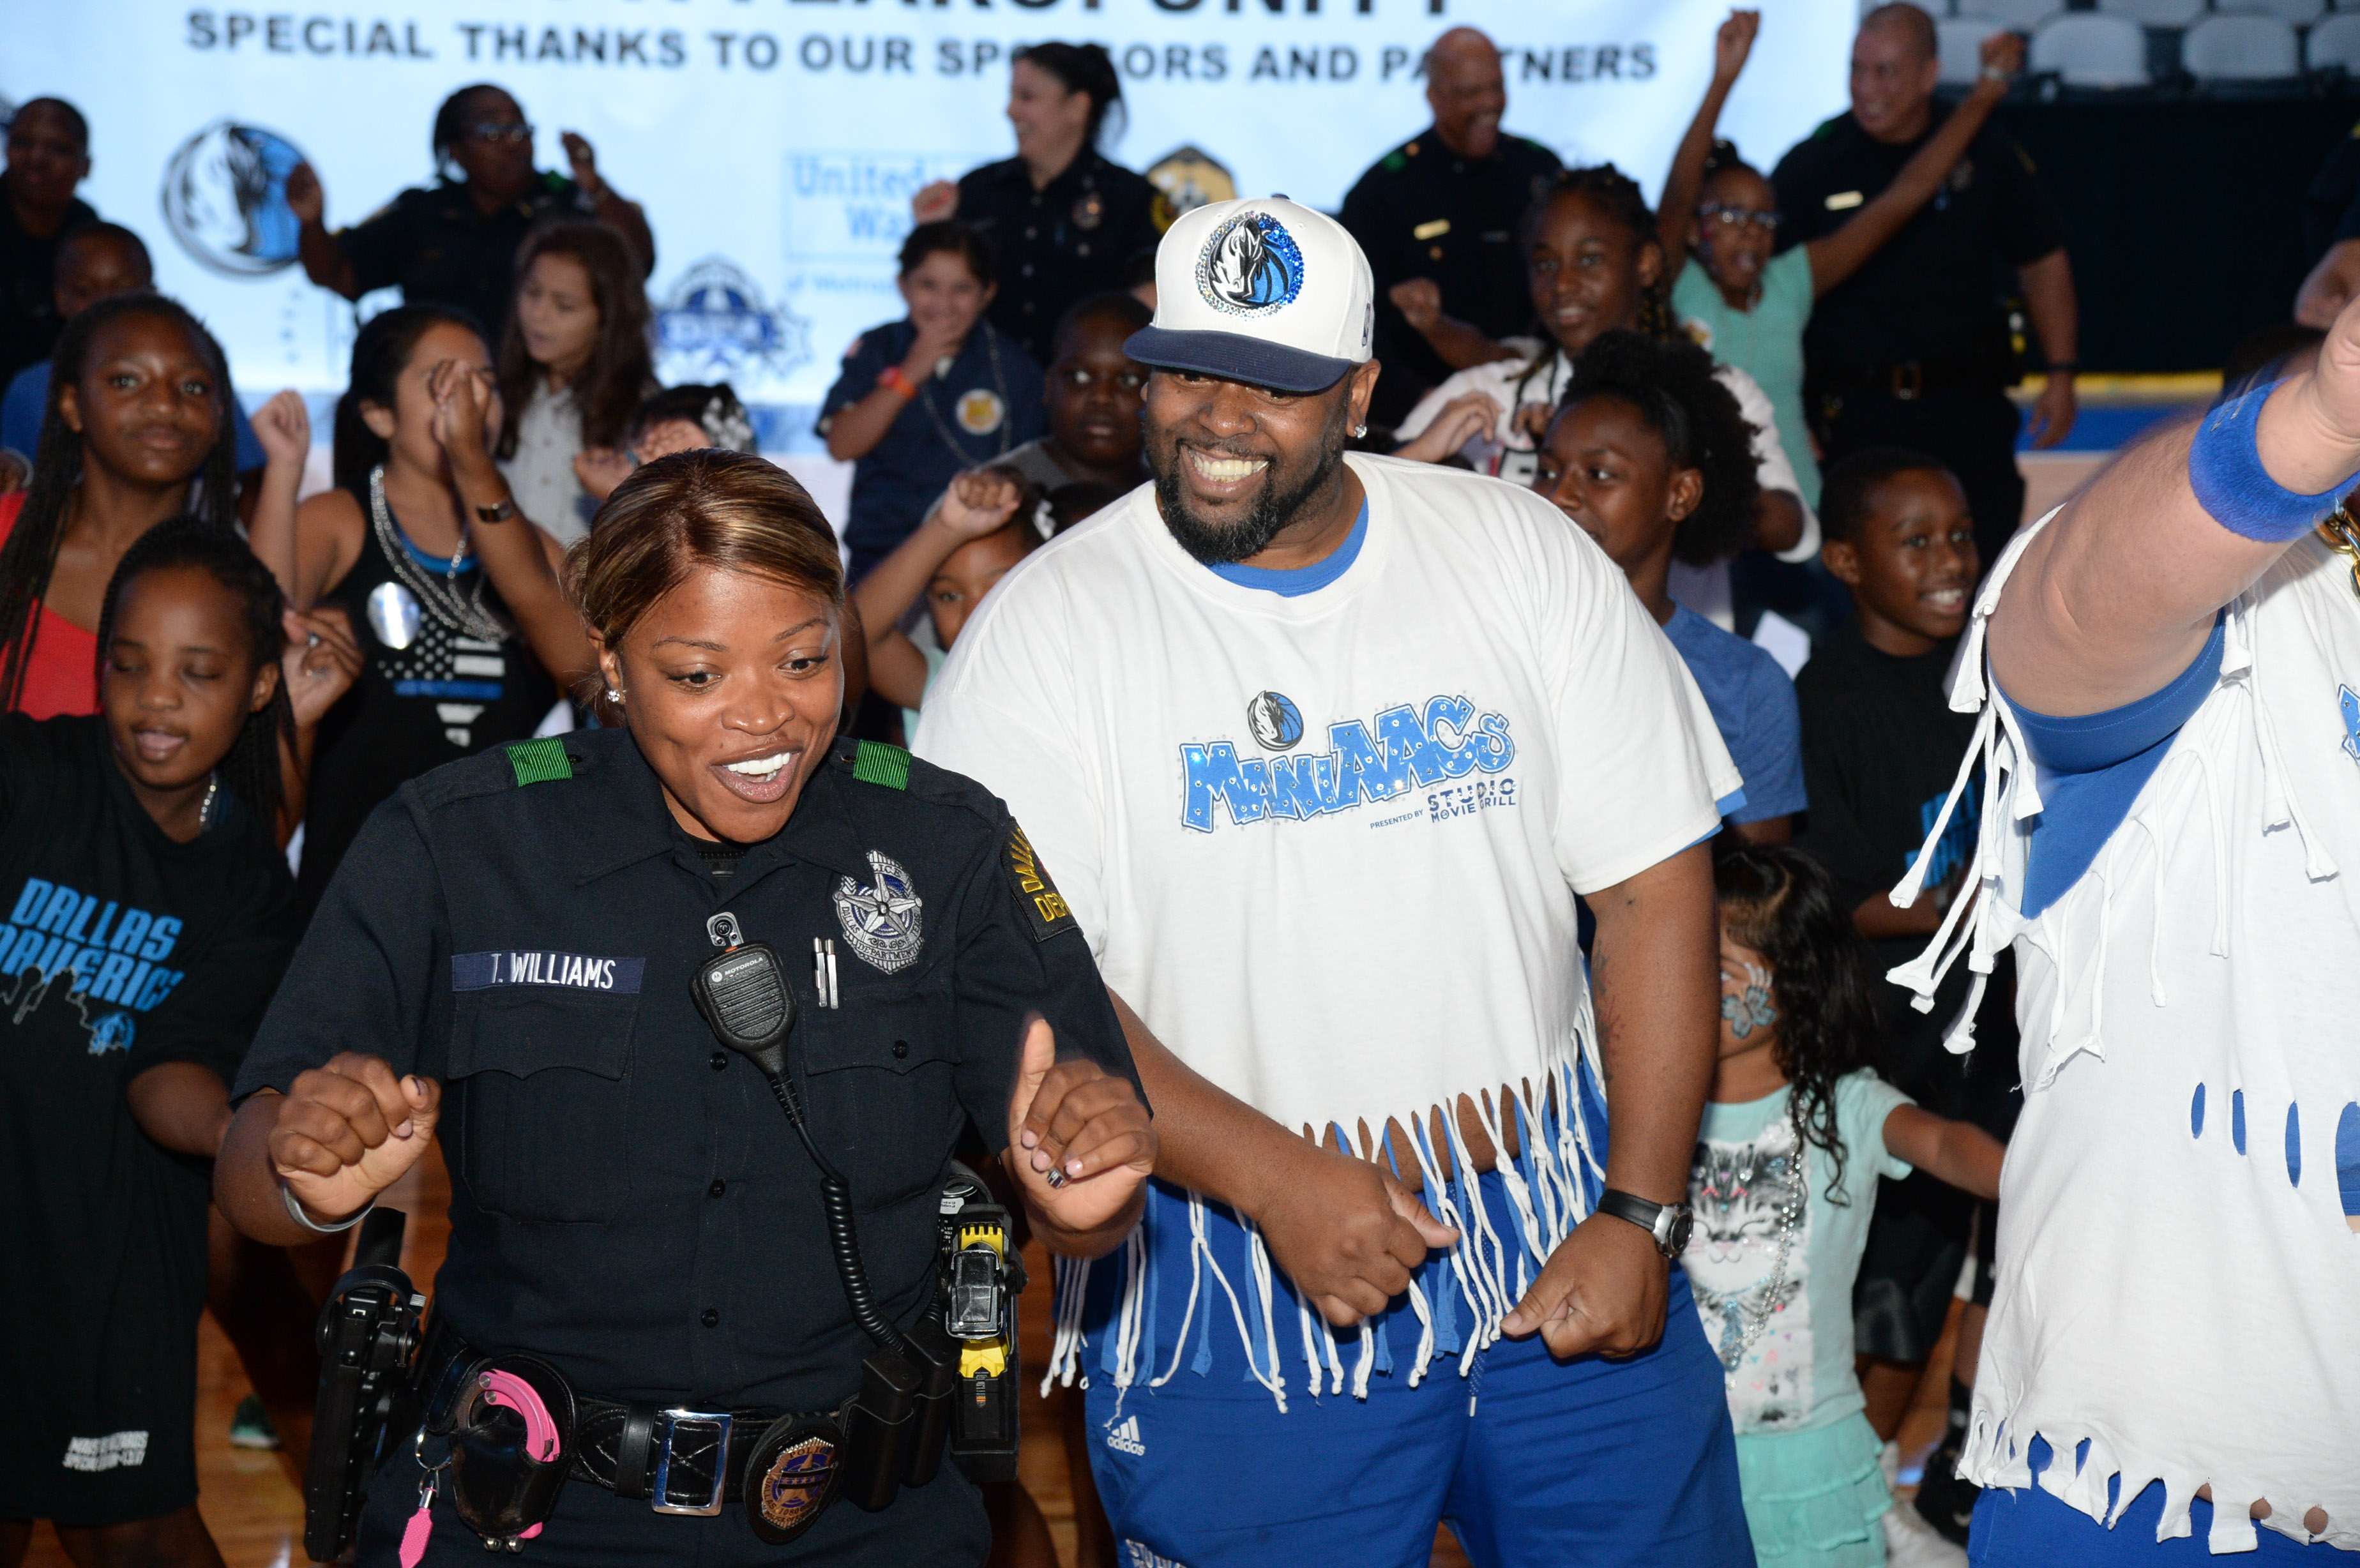 Together We Heal community dance, Dallas Police Department, Mavs ManiAACs, American Airlines Center